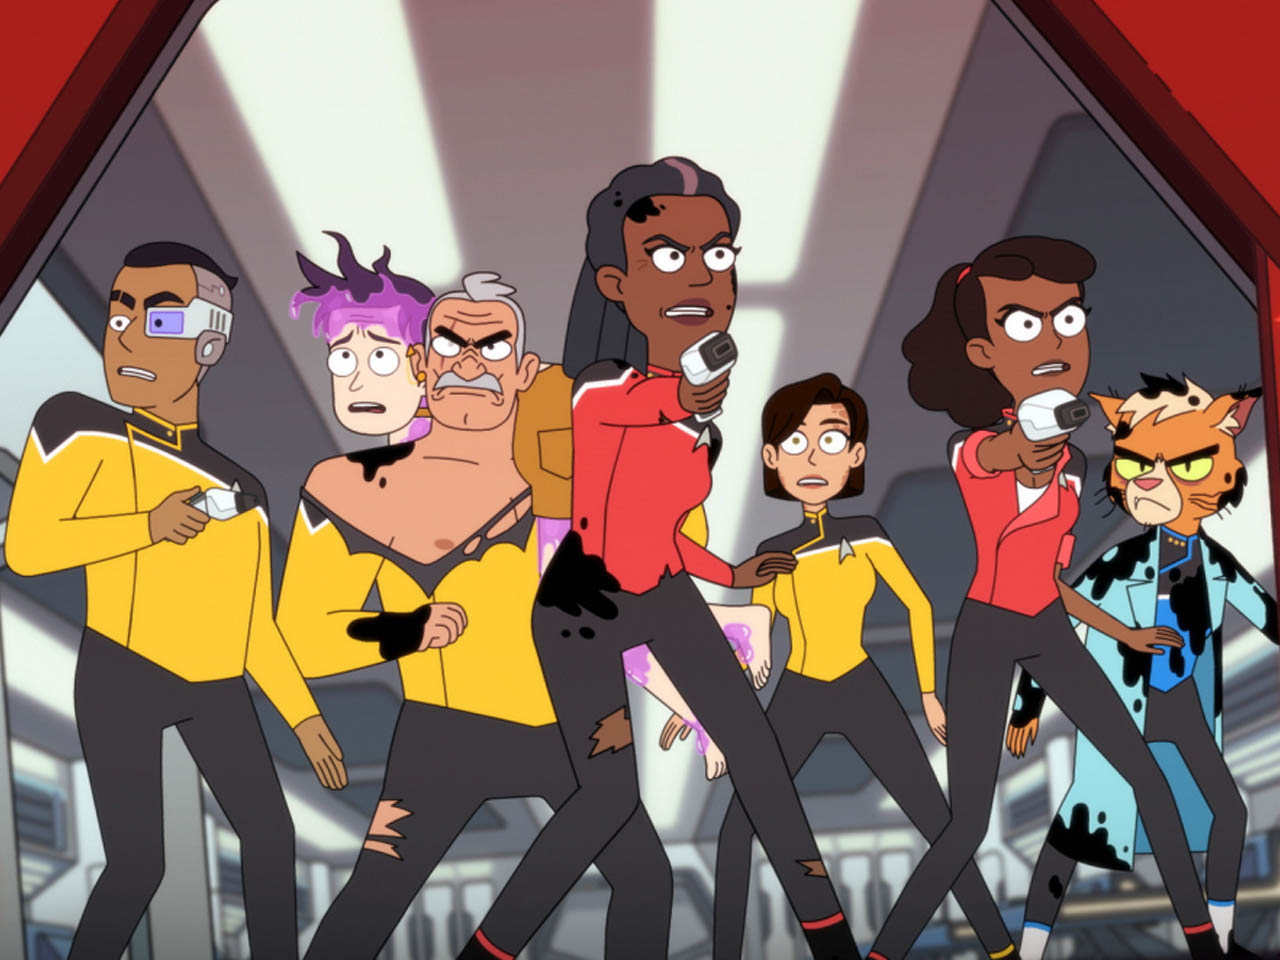 Star Trek: Lower decks trailer shows off the comedy of the Federation.